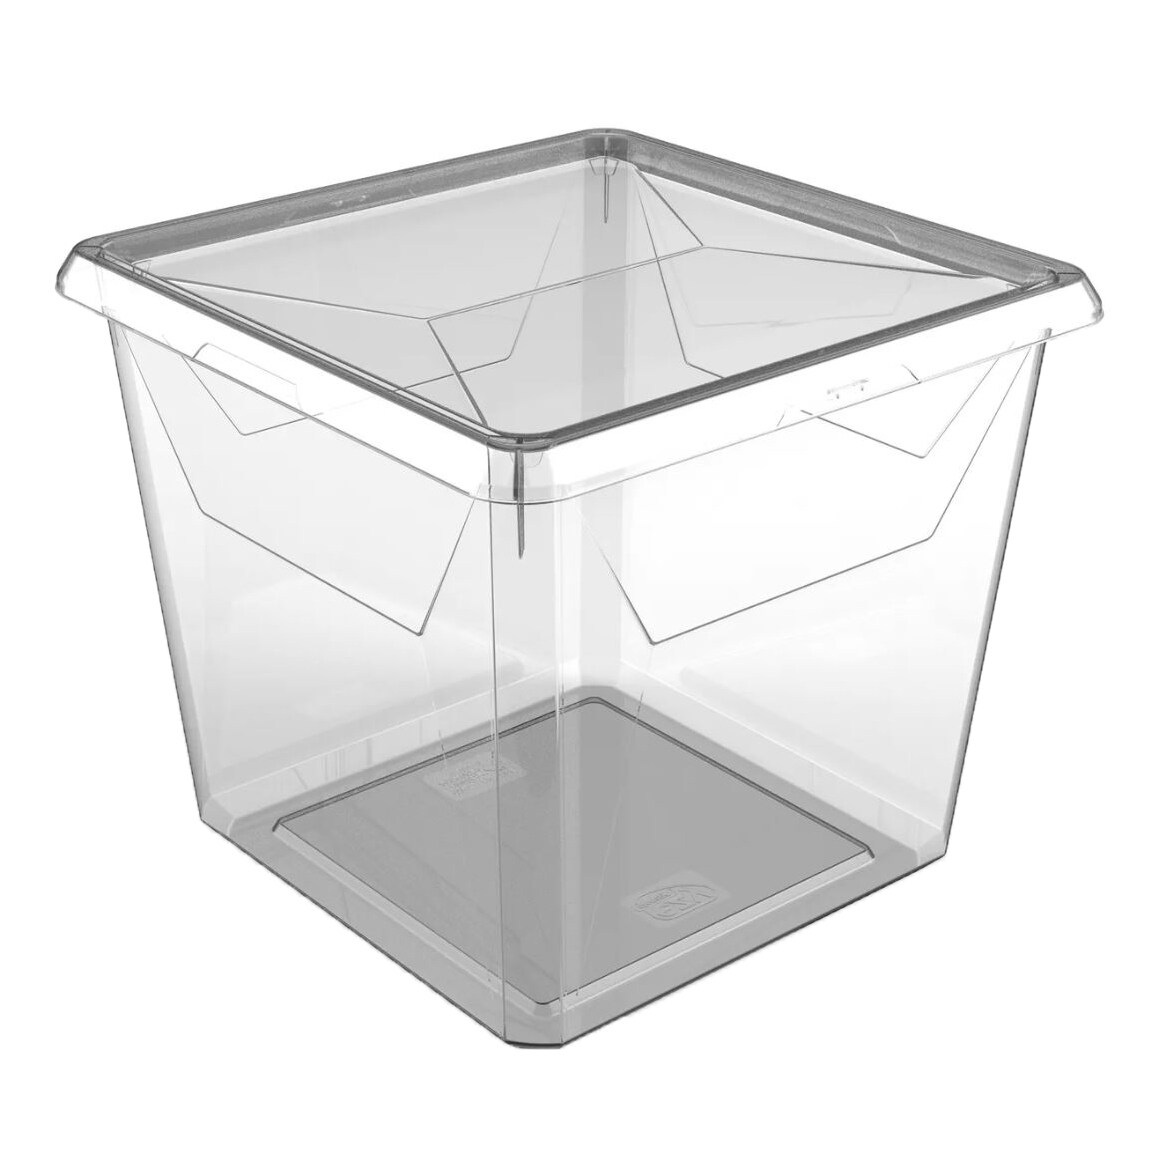 EZ-E1AR 1 Gallon Tall EZ Stor® Plastic Container Hinged Lid